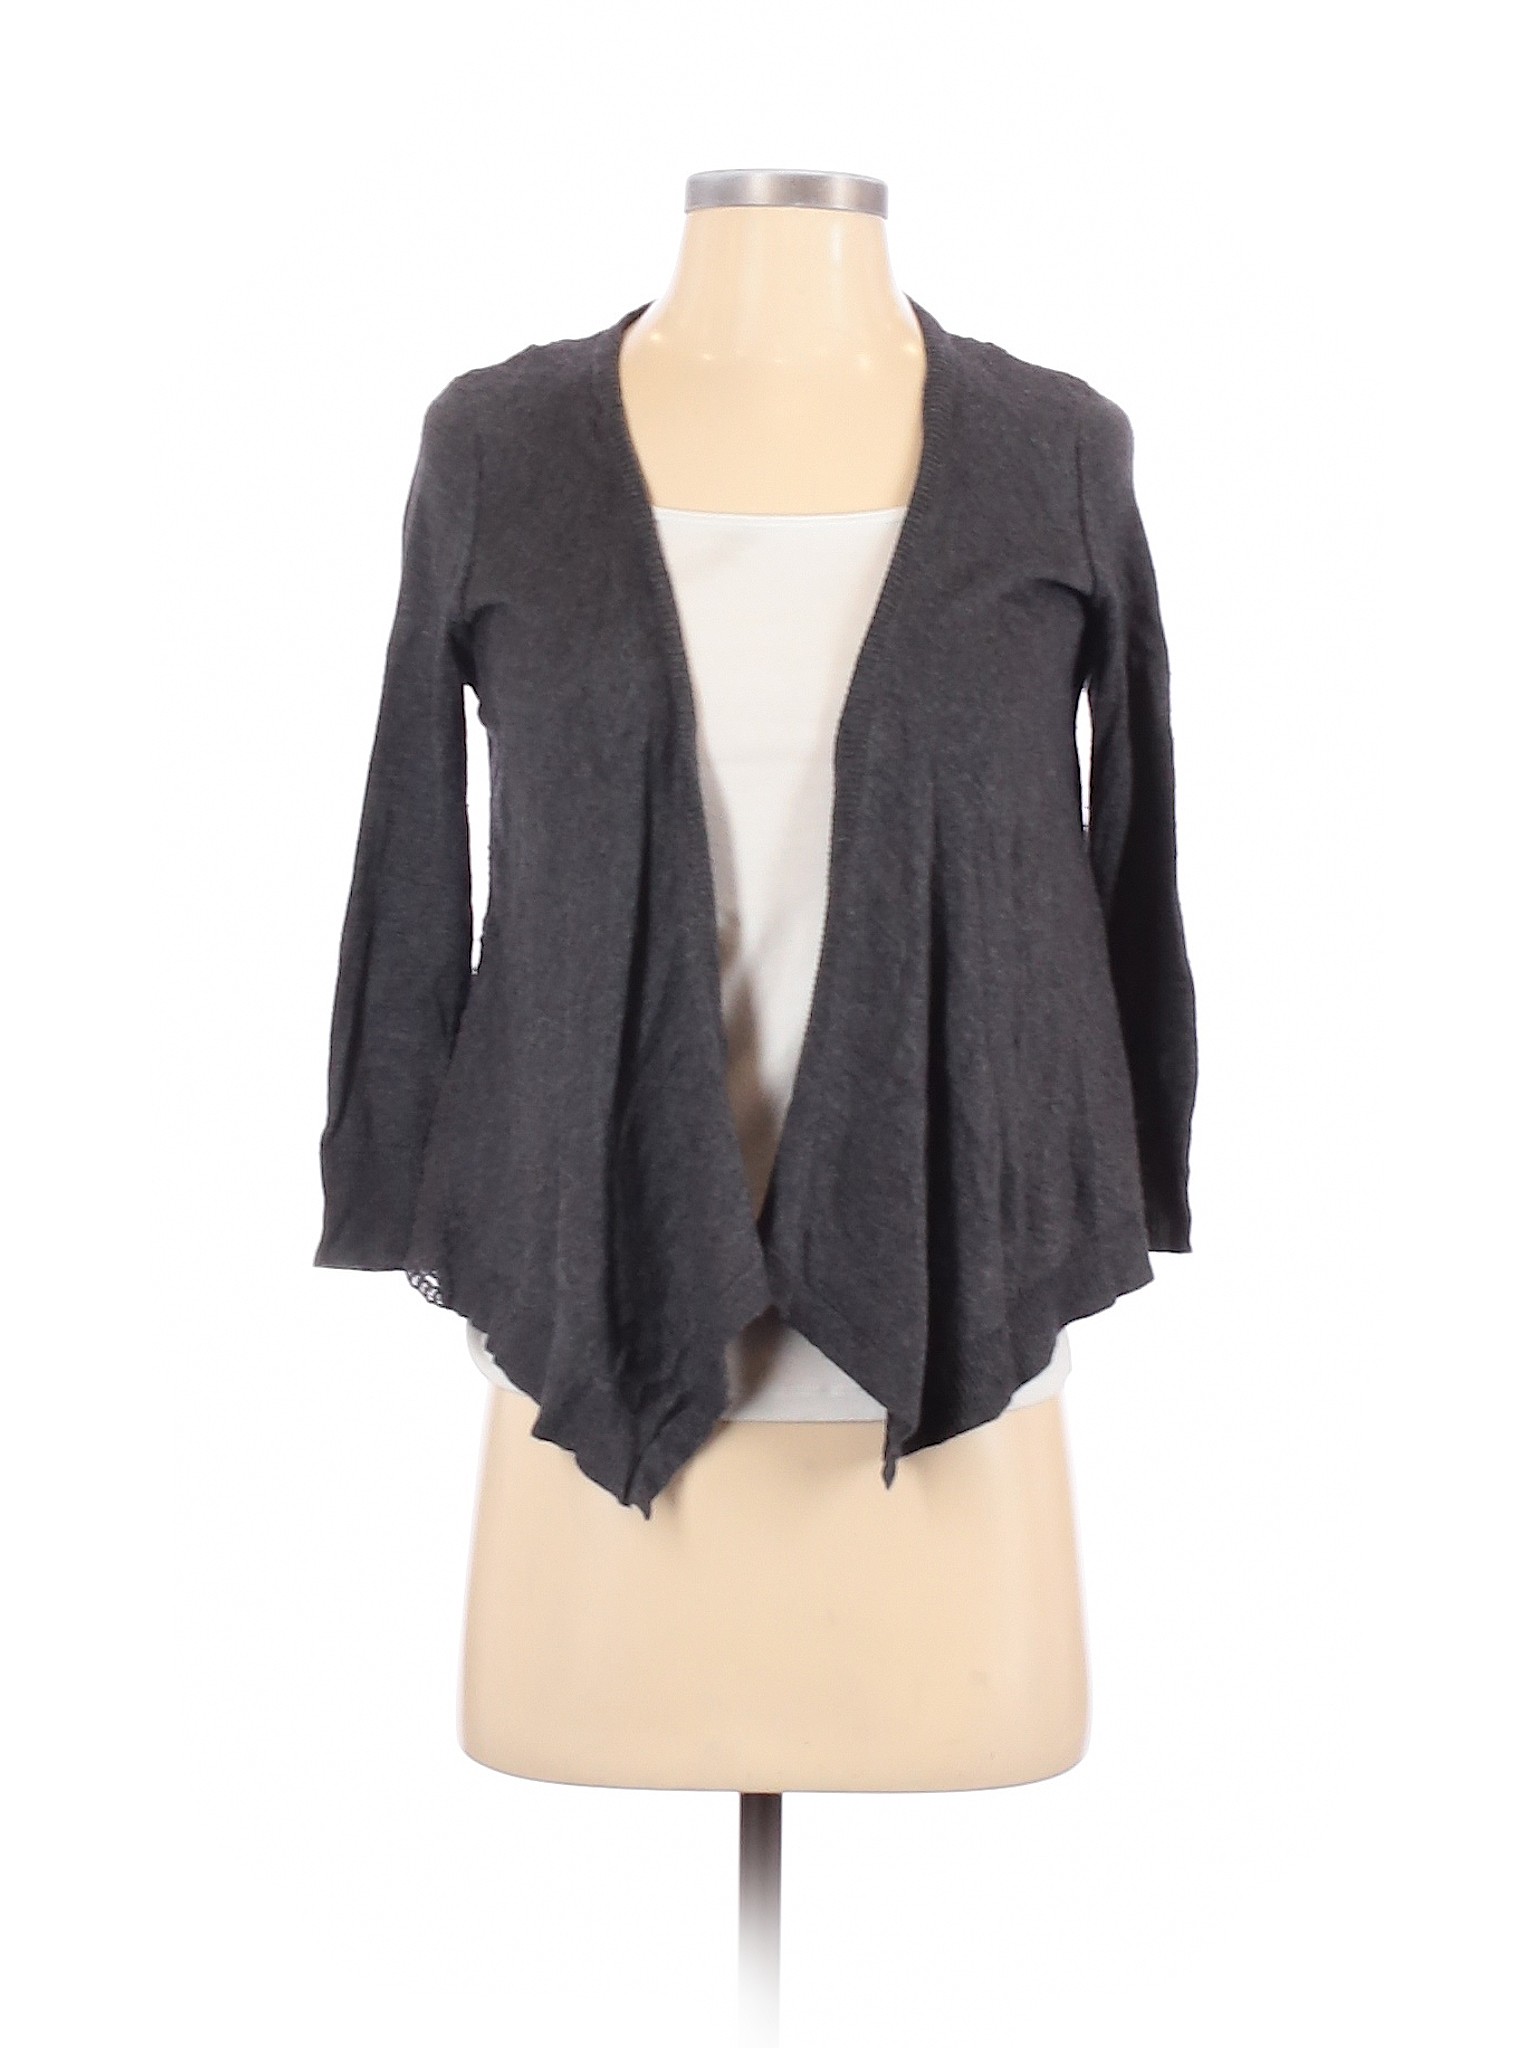 American Eagle Outfitters Women Gray Cardigan S | eBay